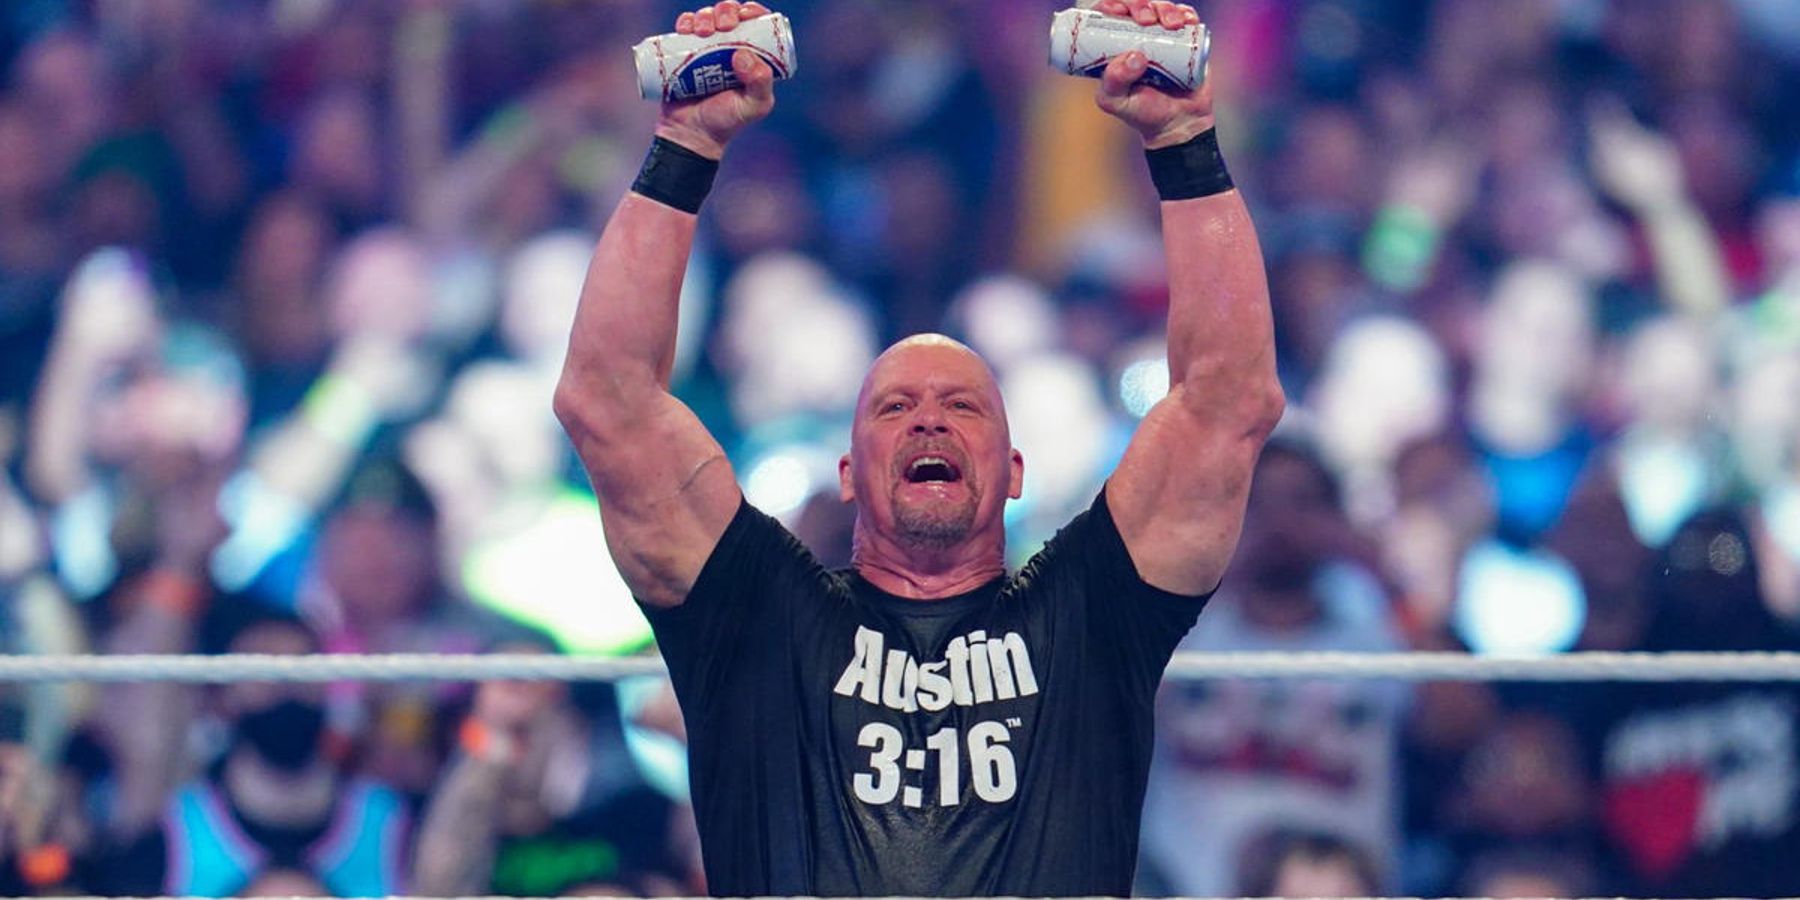 Stone Cold Steve Austin celebrates following his victory over Kevin Owens at WrestleMania 38.